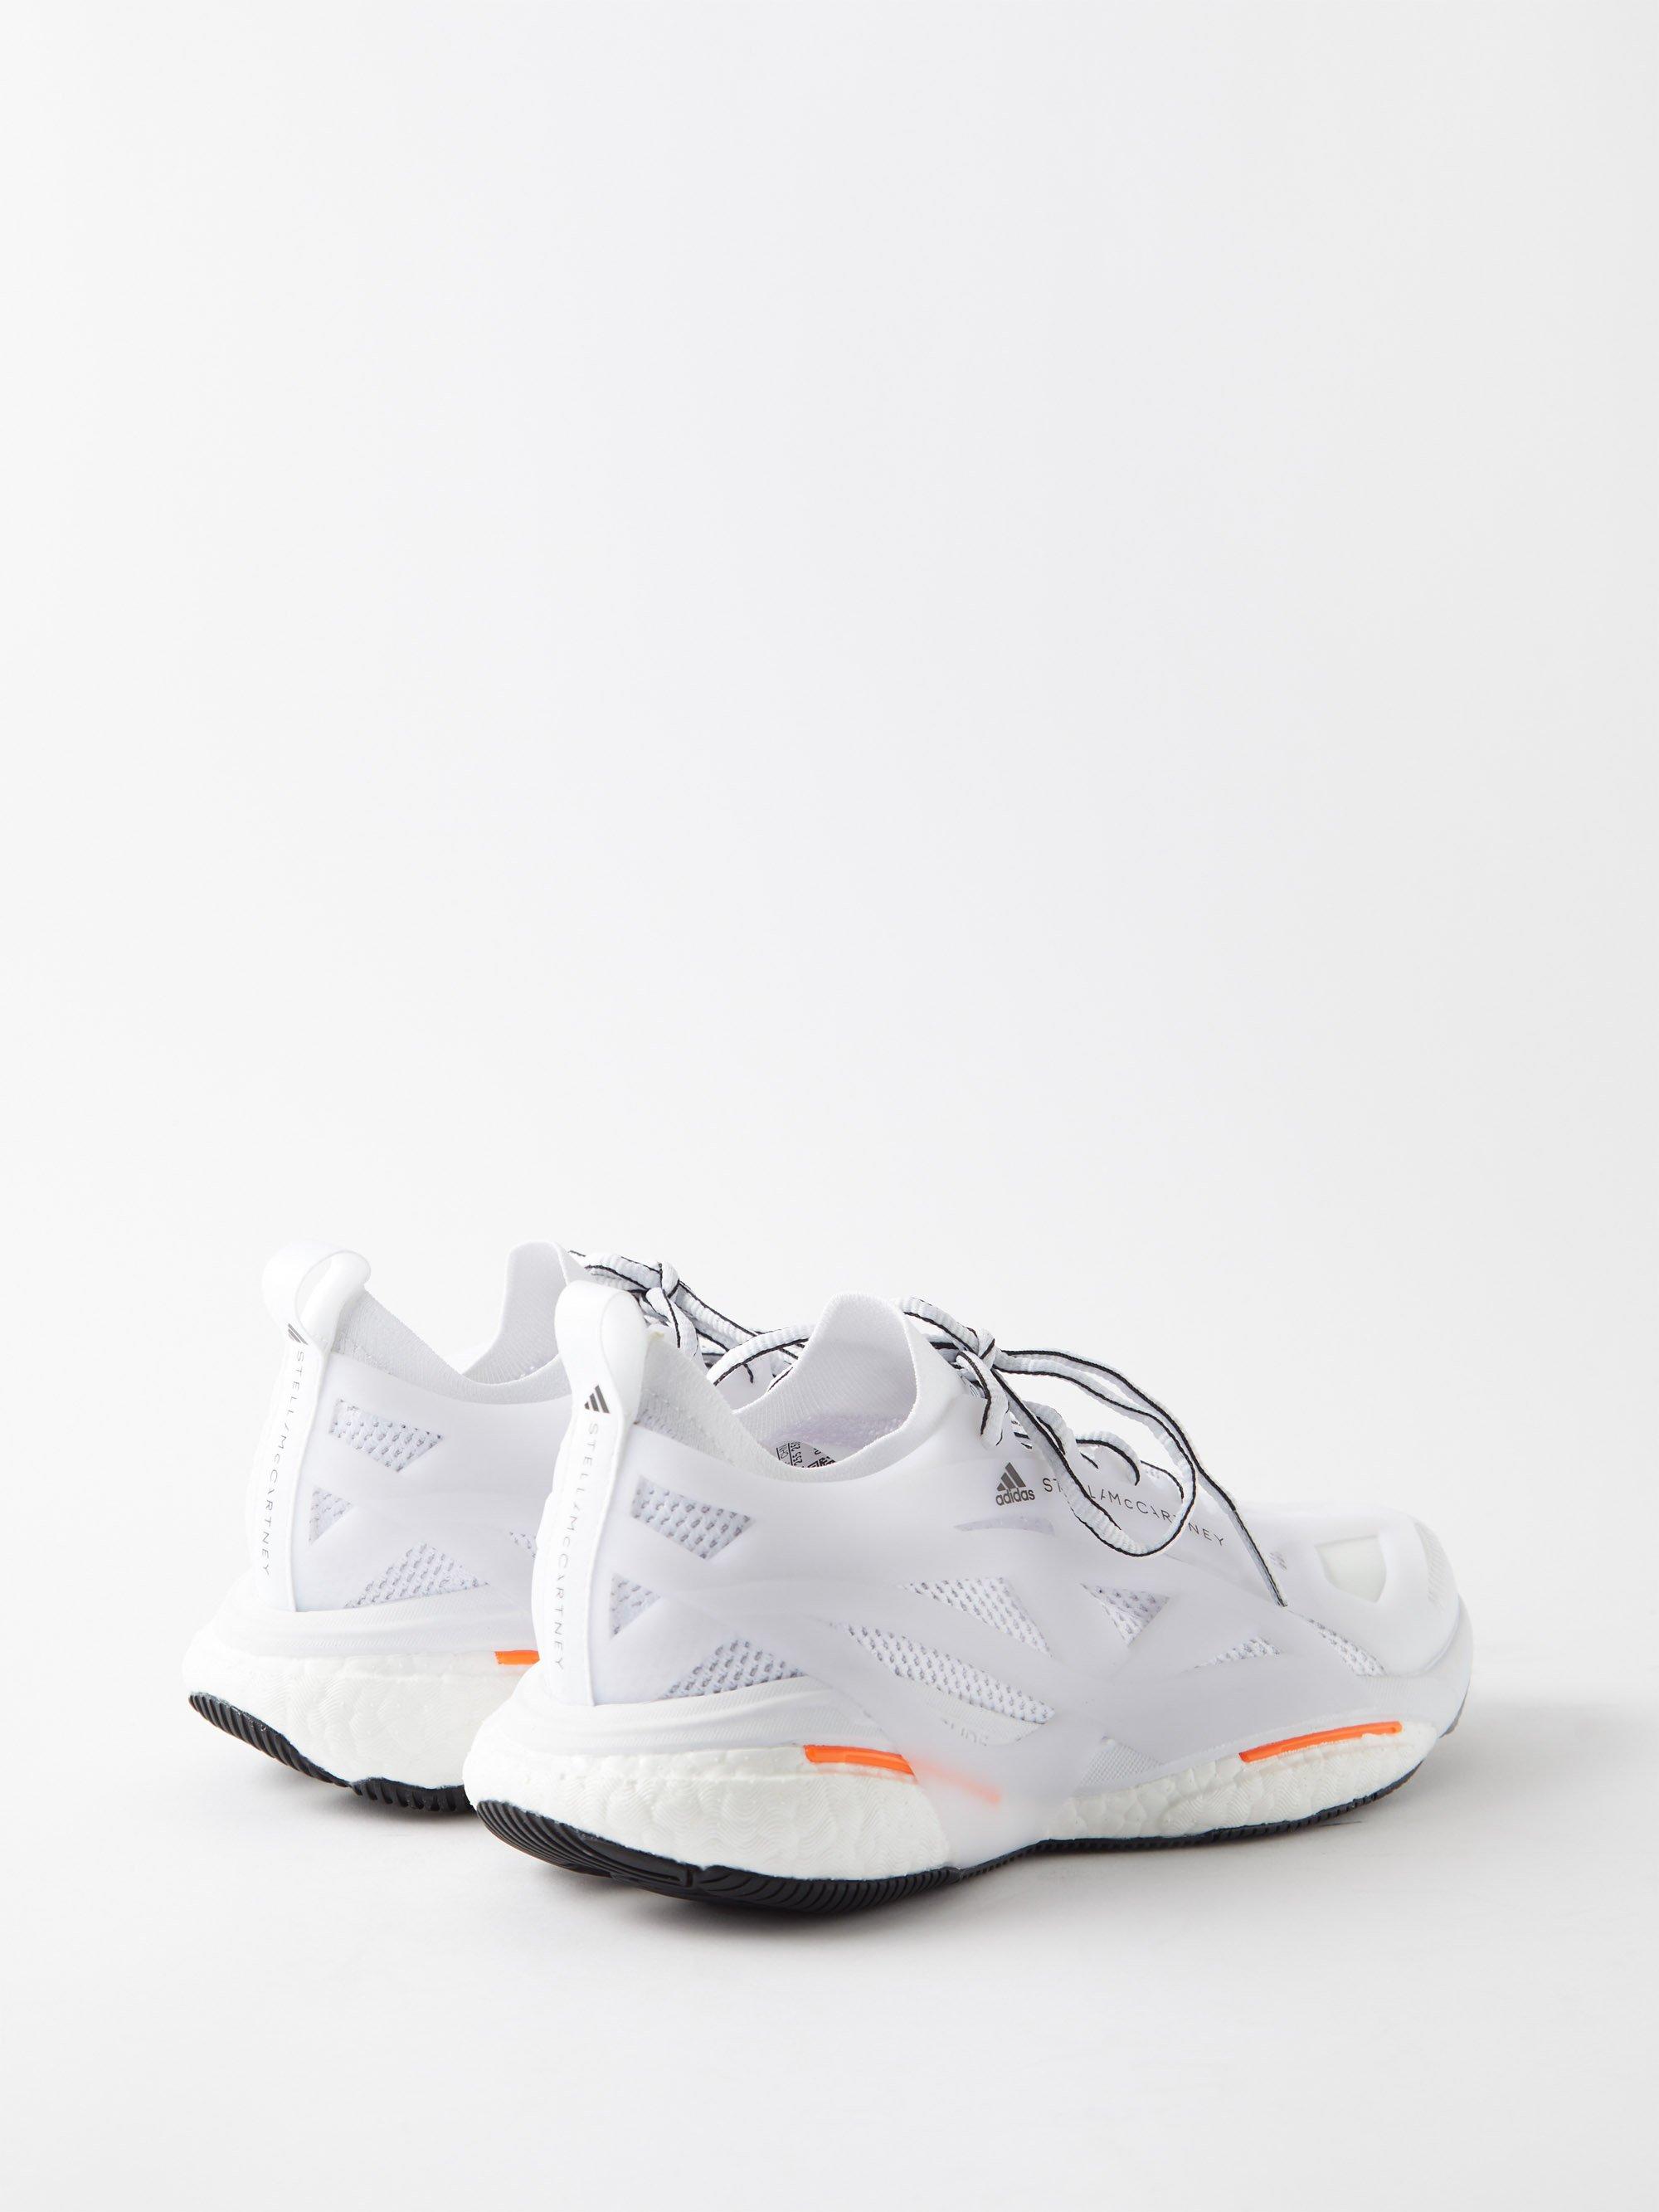 adidas By Stella McCartney Solarglide Running Trainers in White | Lyst